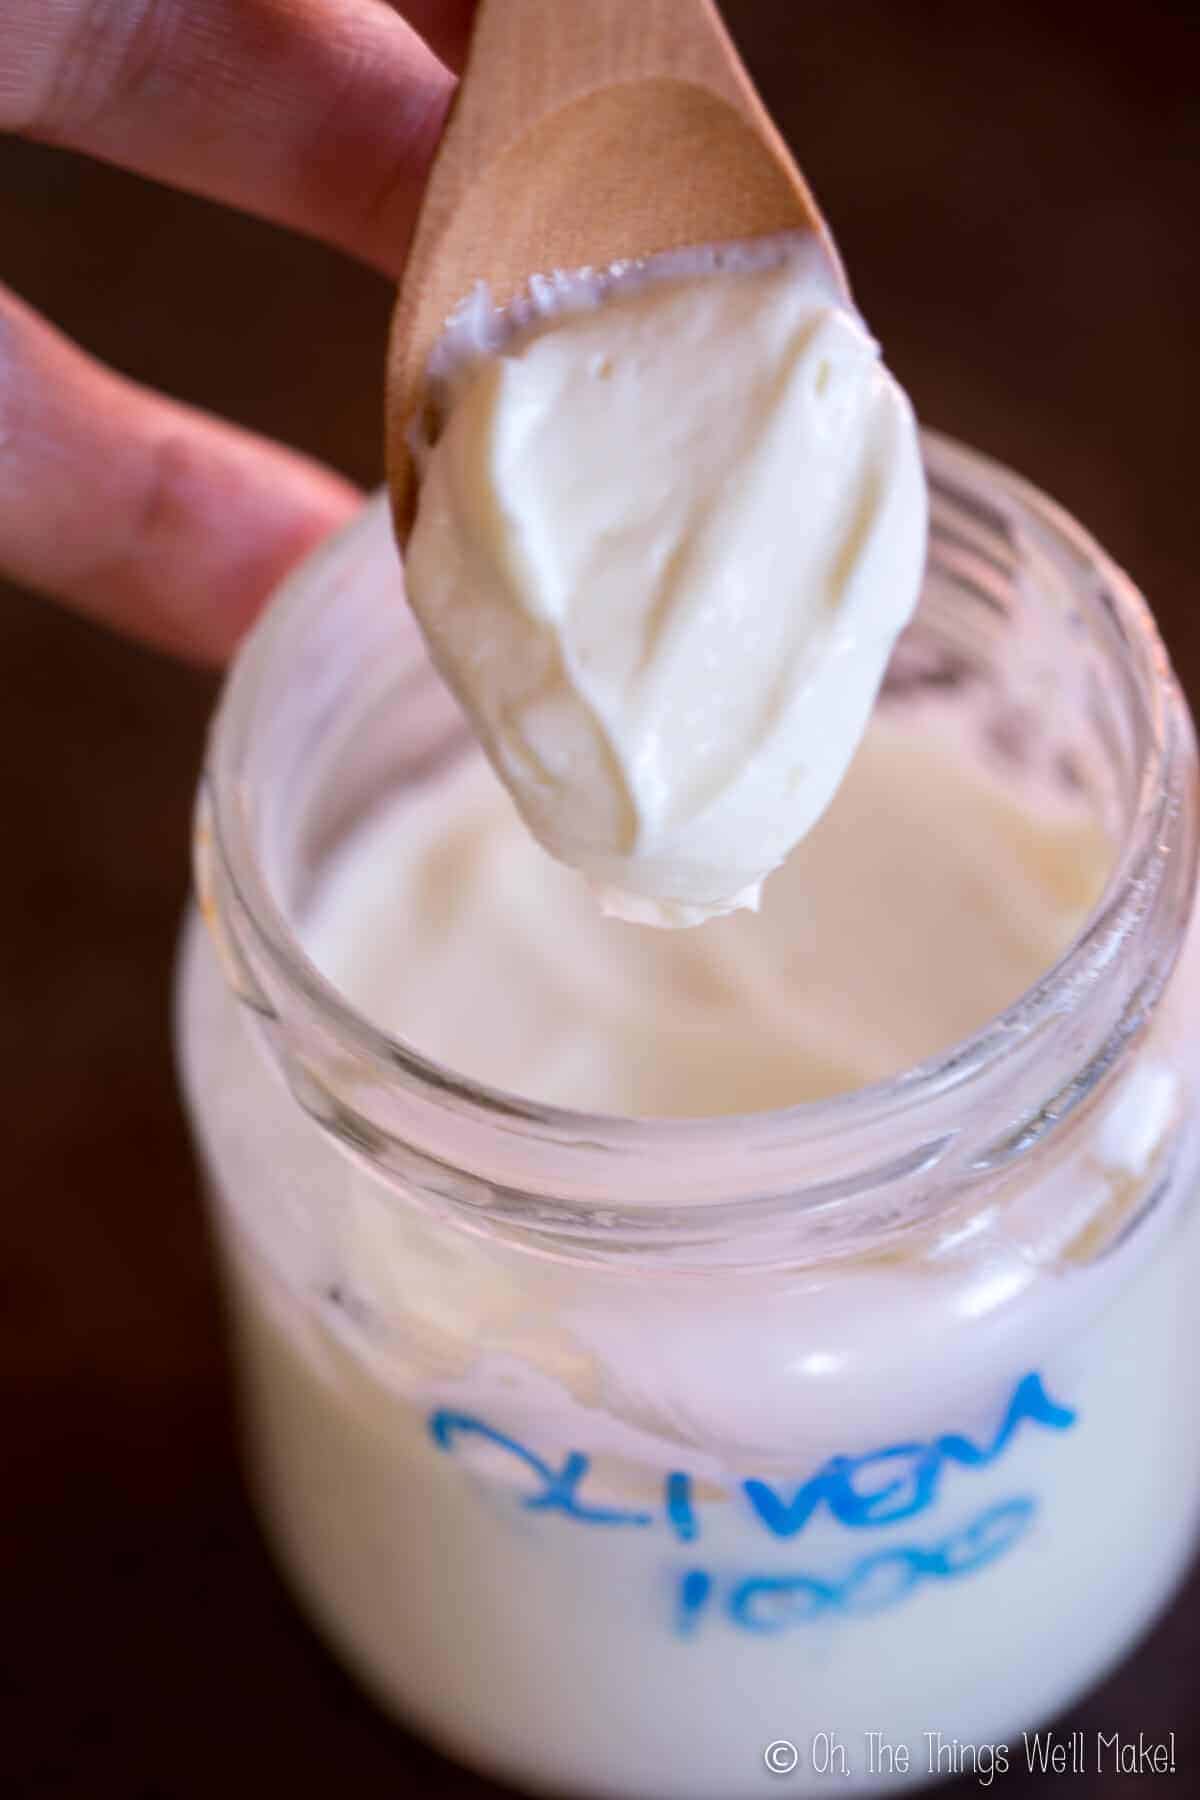 A wooden spoon in a jar of lotion made with Olivem 1000, showing the texture.